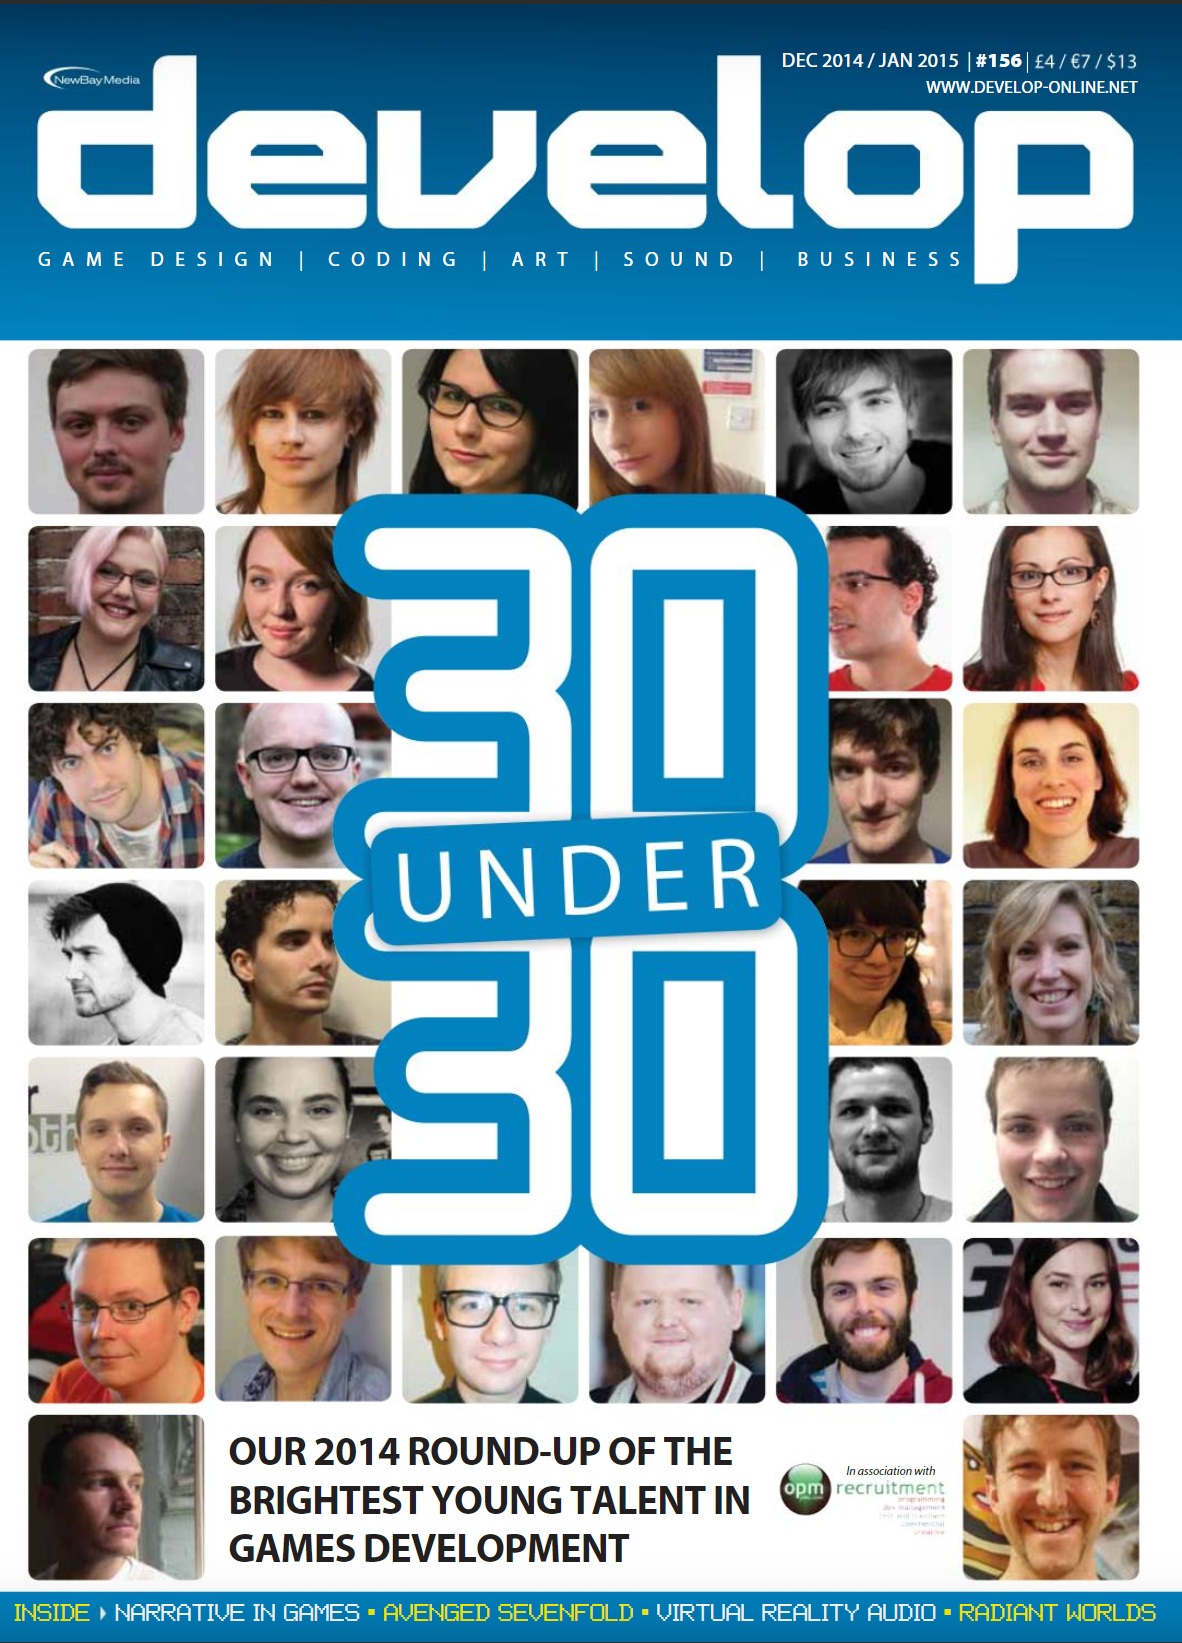 Named one of Develop Online's 30under30, 2015